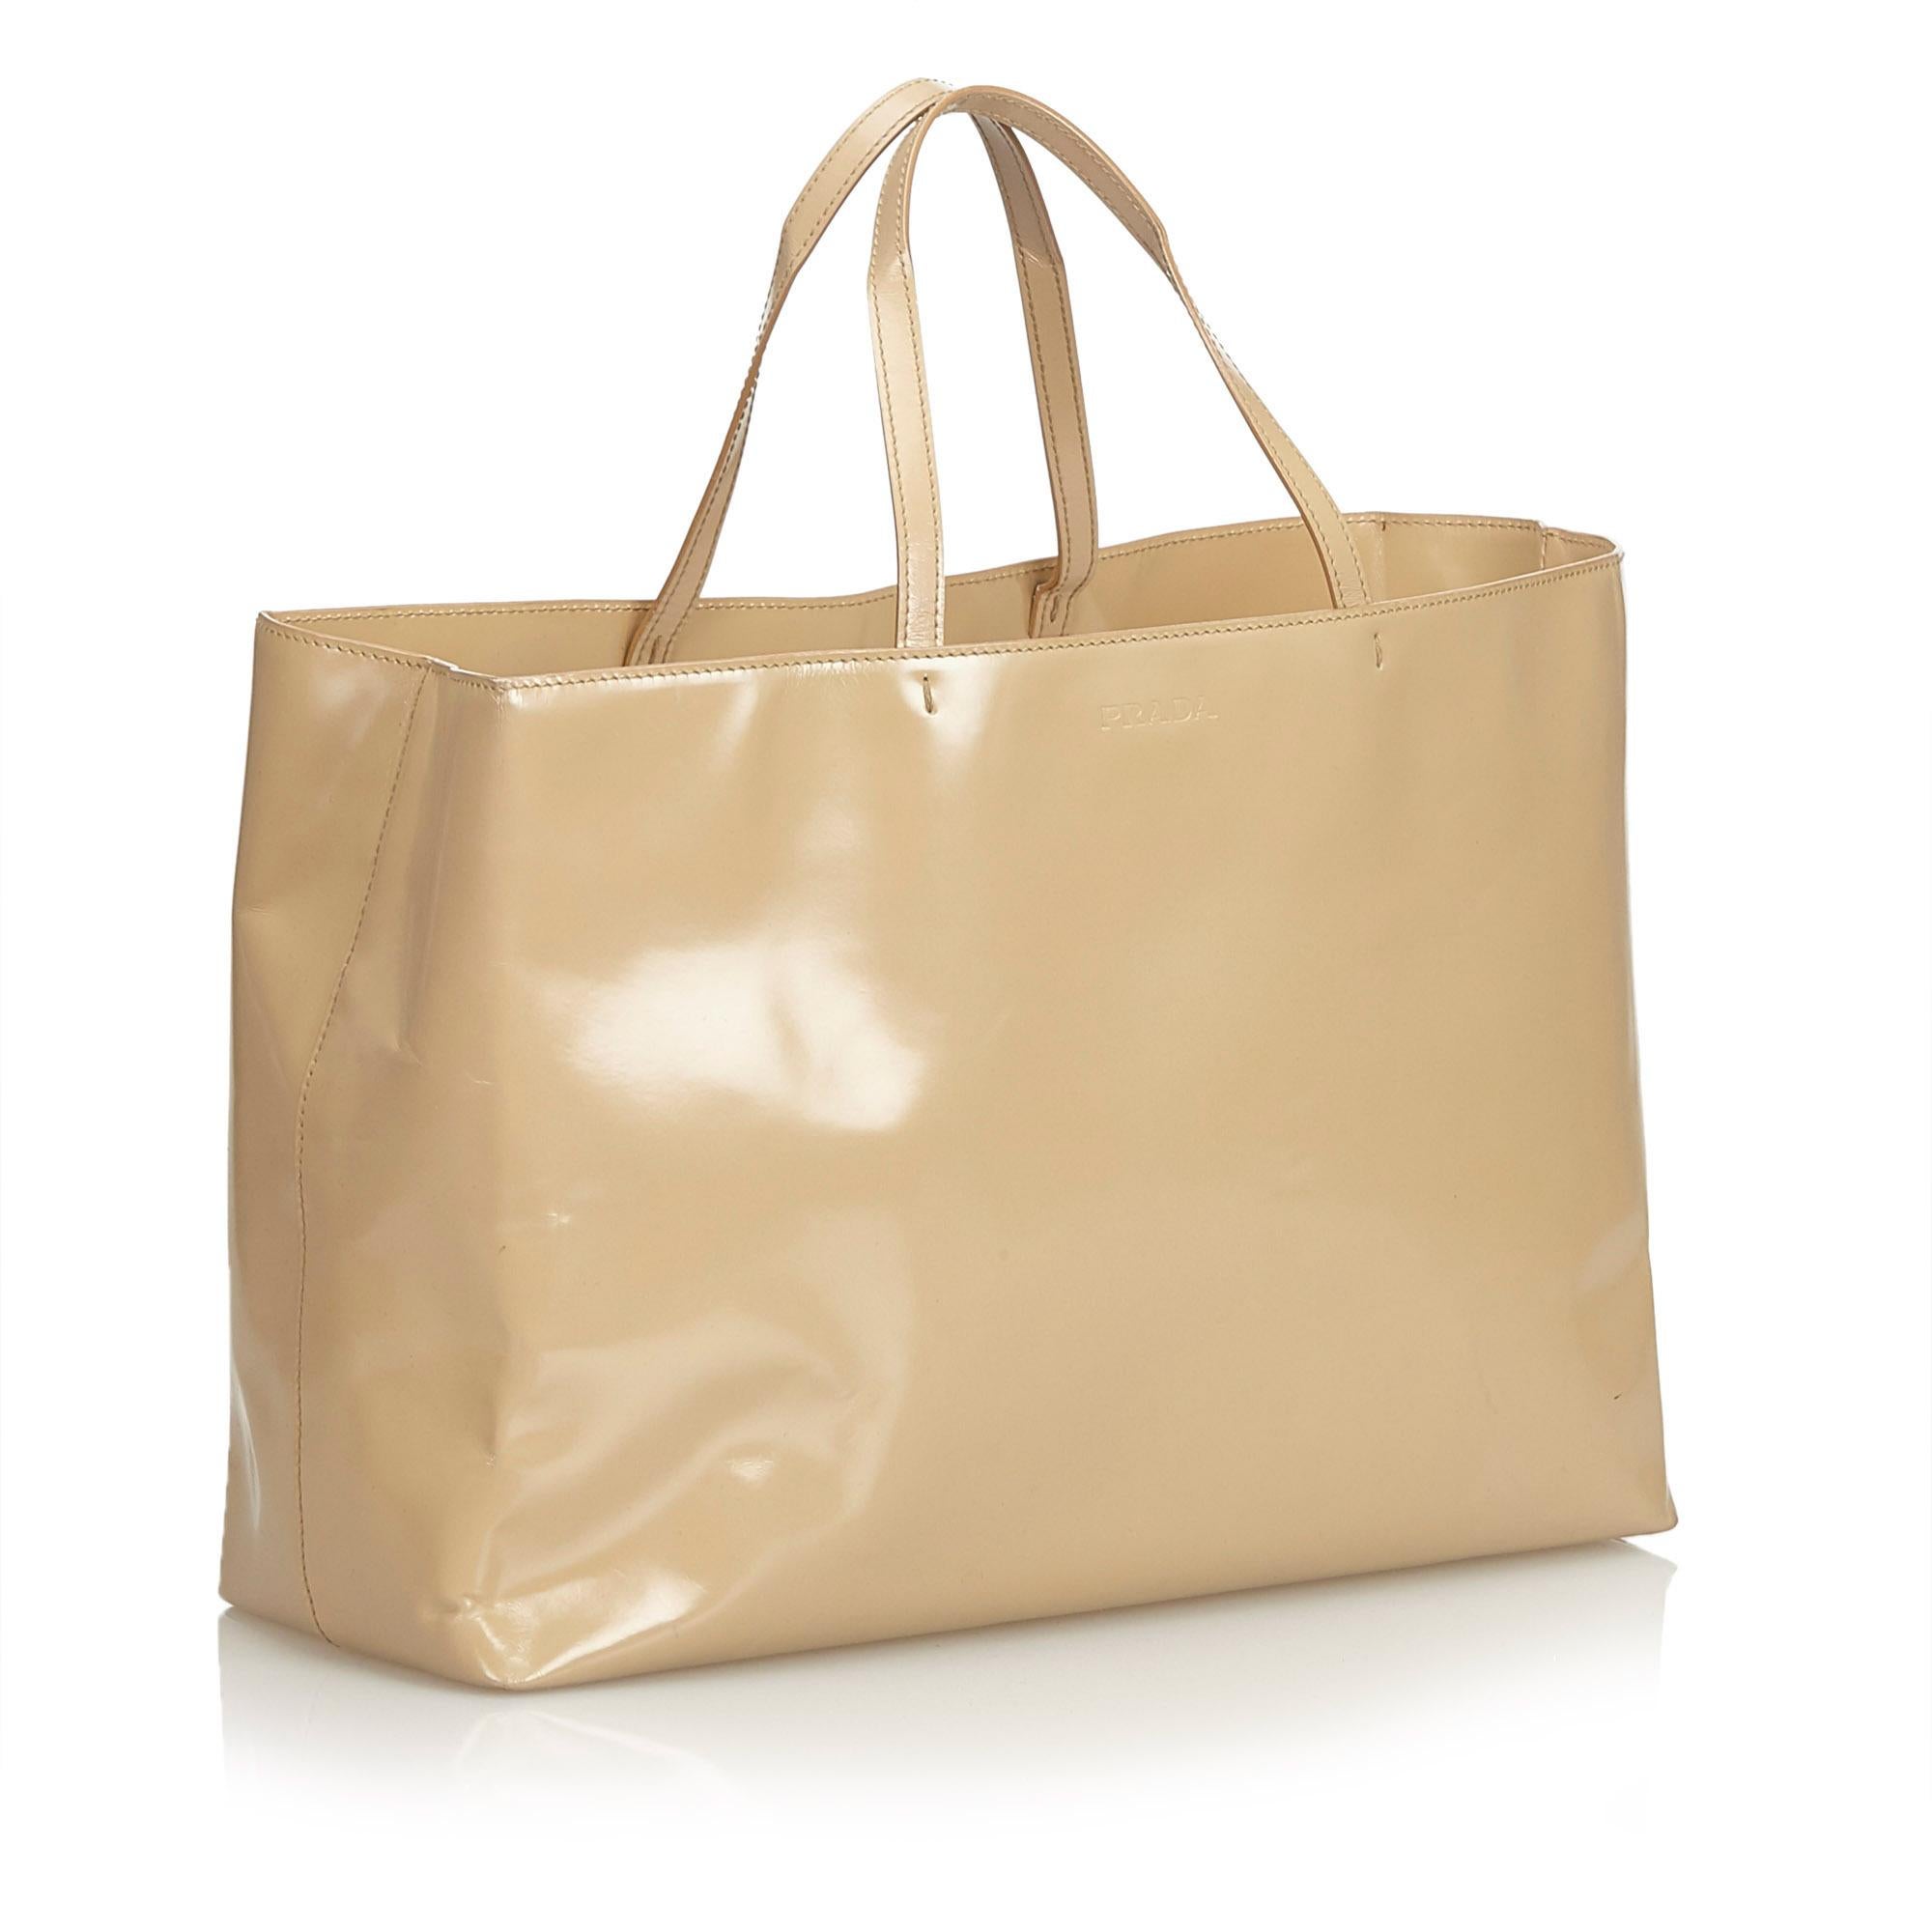 This tote bag features a leather body, flat leather straps, an open top, and an interior zip pocket. It carries as B+ condition rating.

Inclusions: 
Dust Bag
Dimensions:
Length: 24.00 cm
Width: 35.00 cm
Depth: 13.00 cm
Hand Drop: 13.00 cm
Shoulder